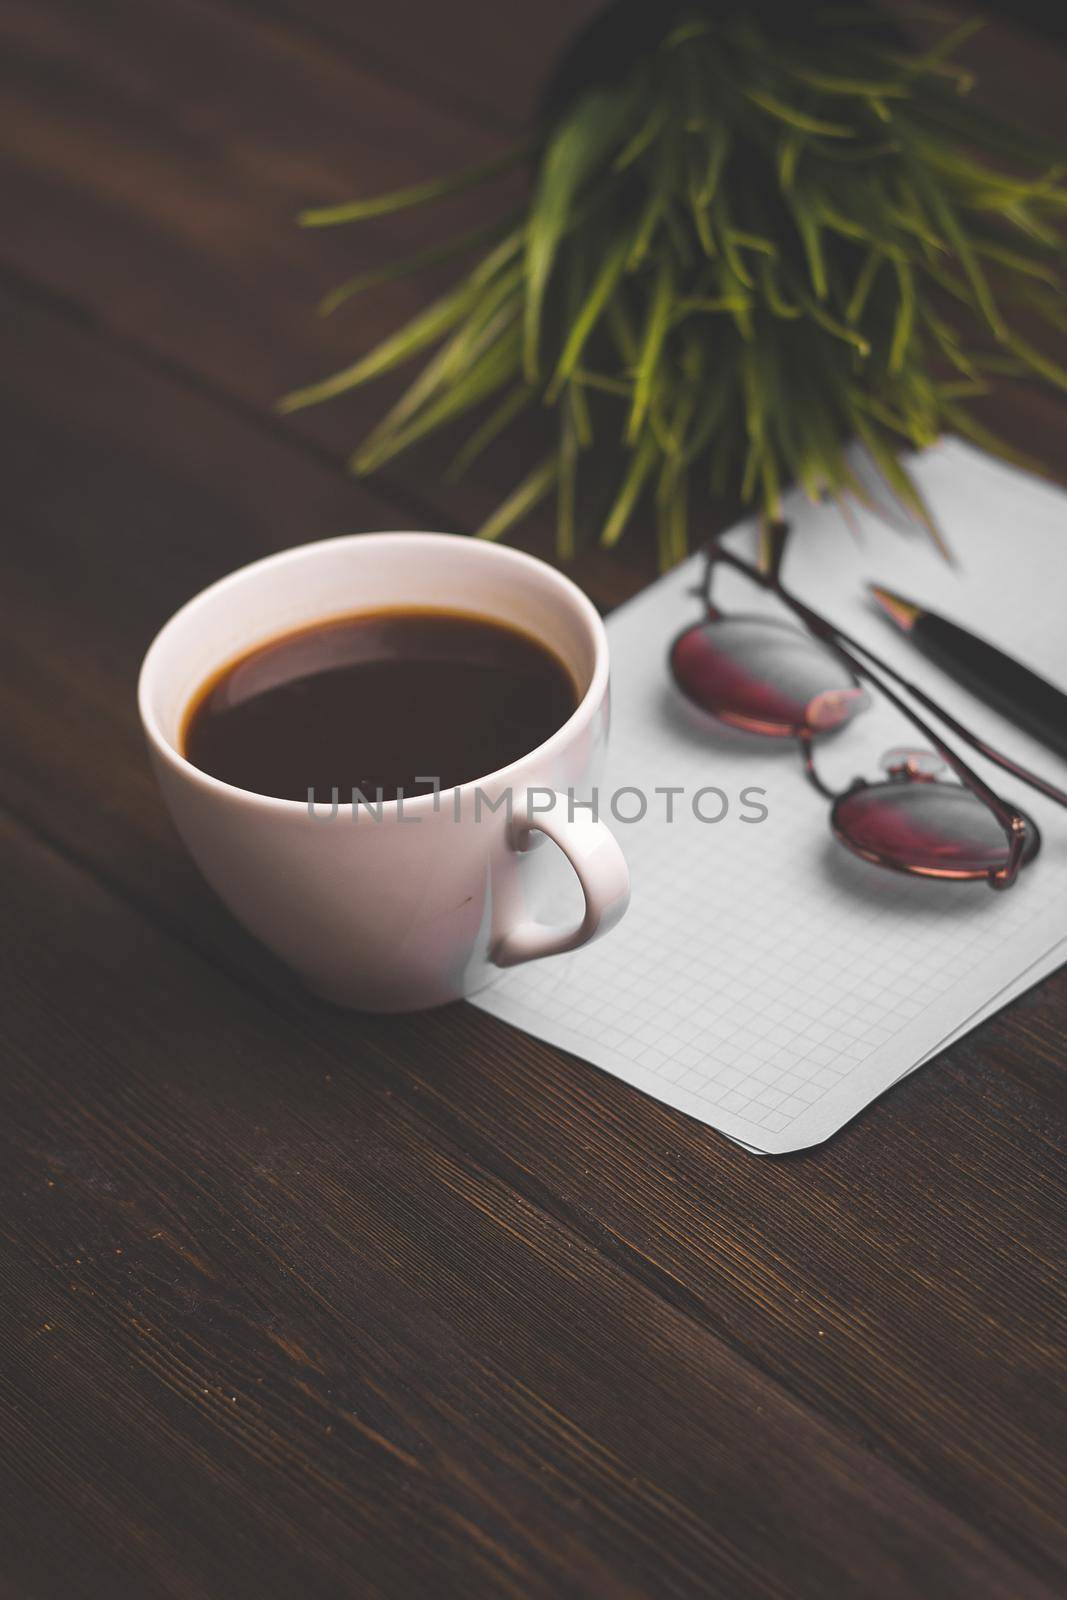 a cup of coffee notepad handle cafe the view from the top by Vichizh